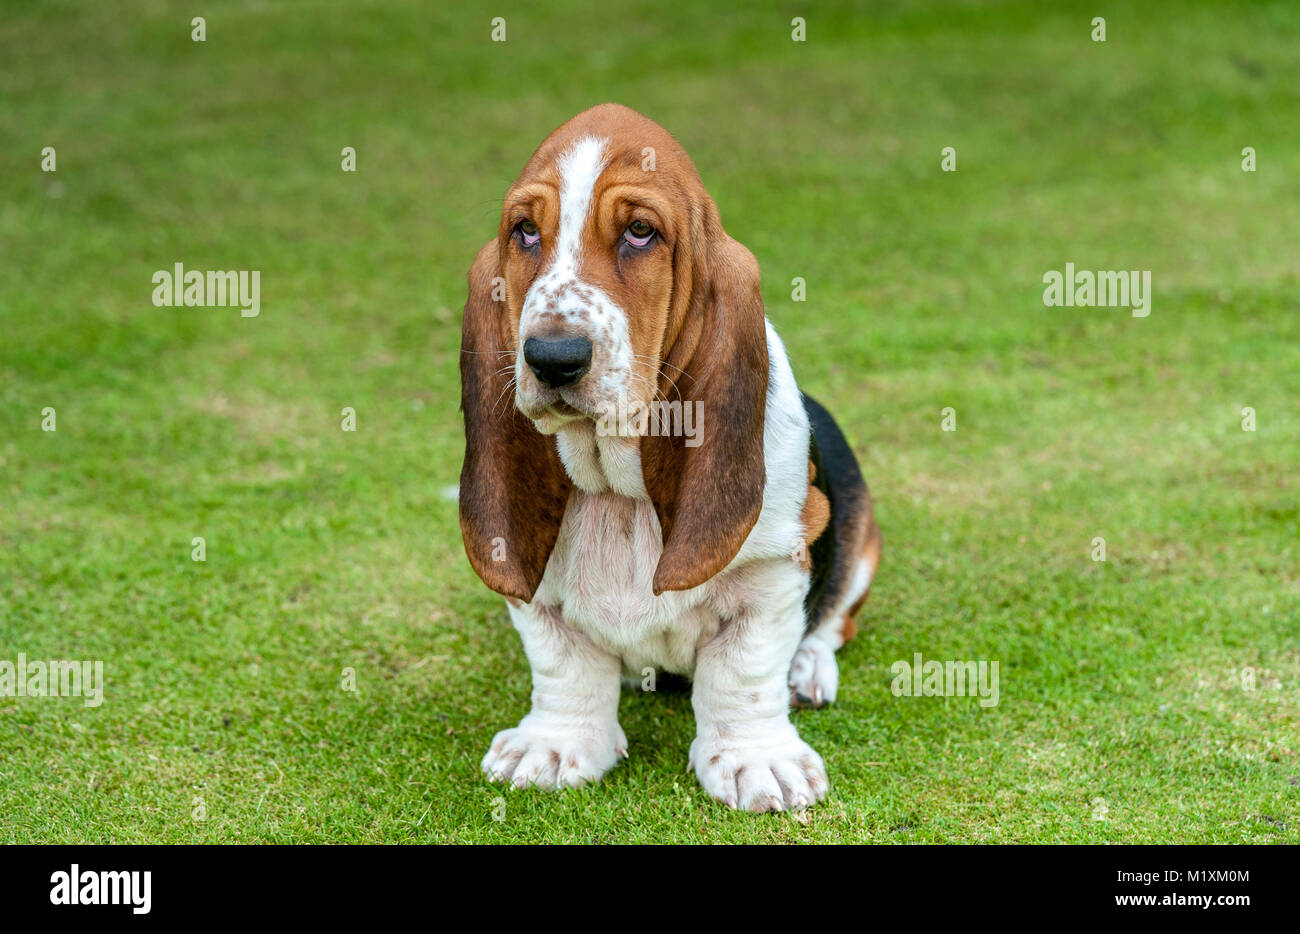 The Basset Hound is a short-legged breed of dog of the hound family. The Basset is a scent hound that was originally bred for the purpose of hunting h Stock Photo